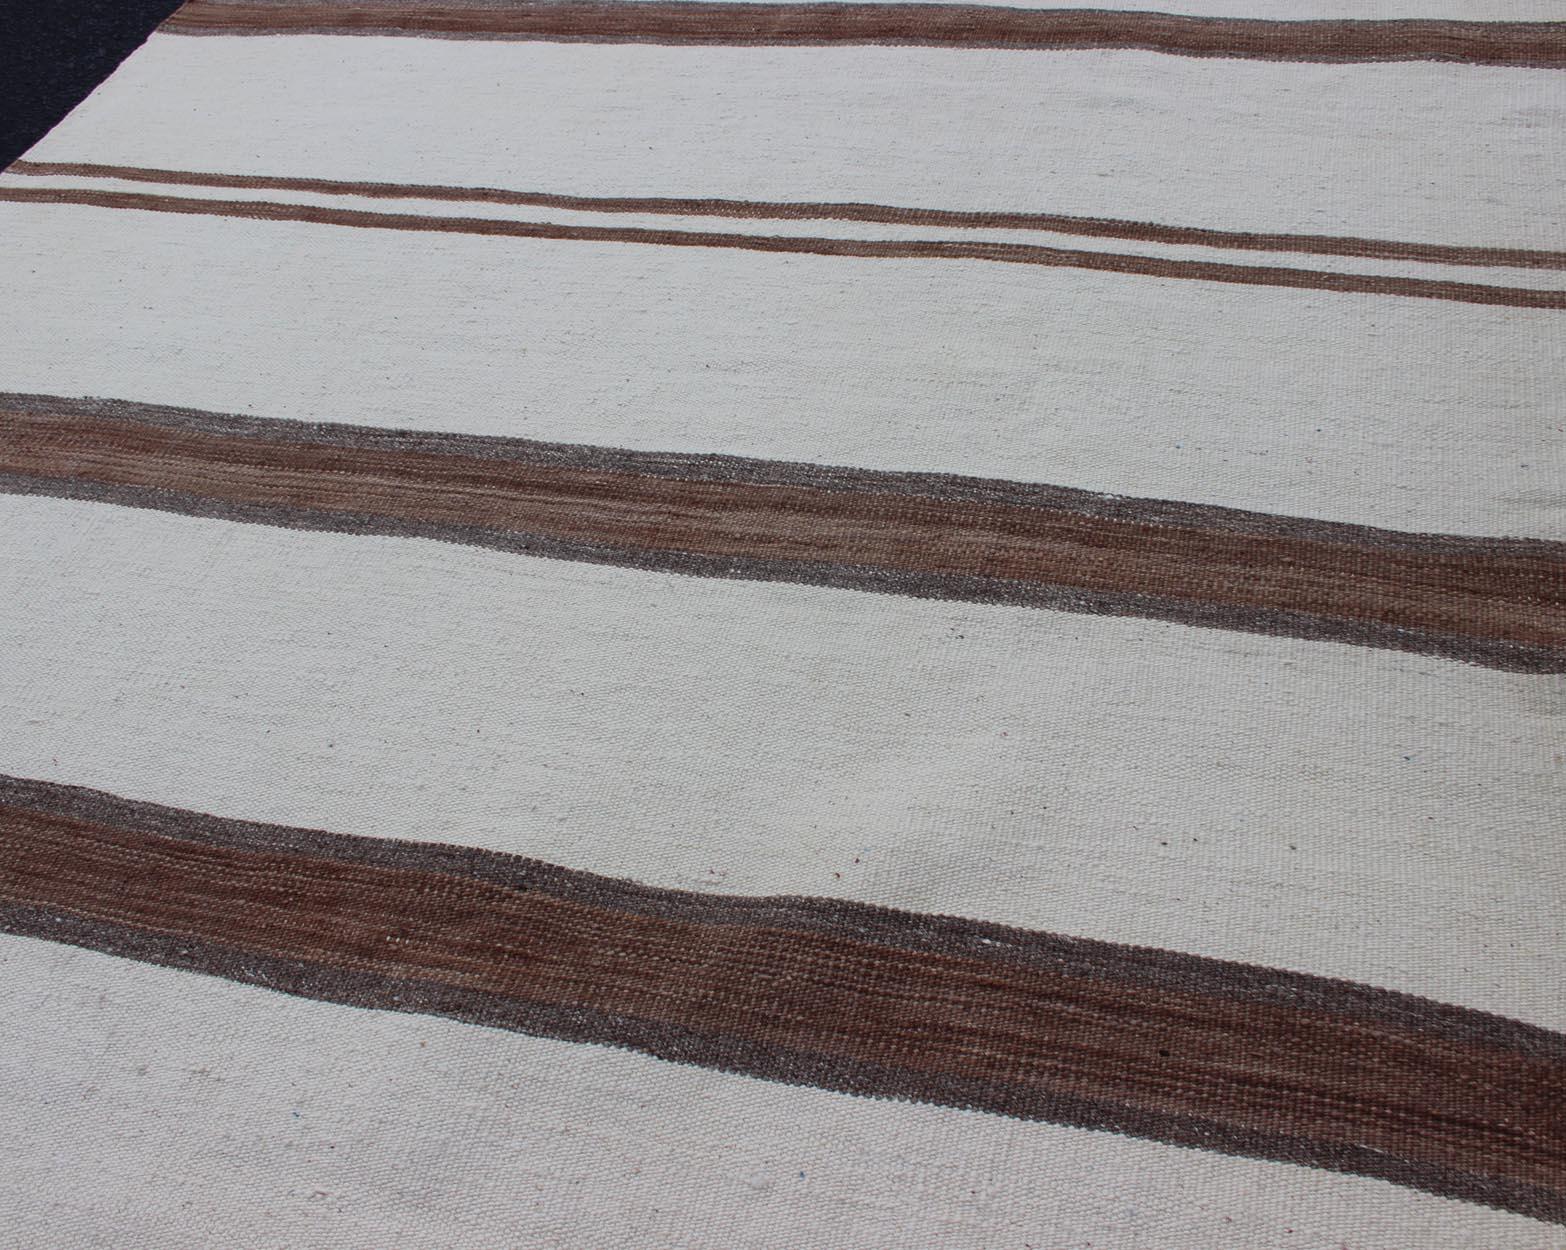 Hand-Woven Turkish Vintage Kilim Flat-Weave Rug in Off White, Brown with Stripe Design For Sale